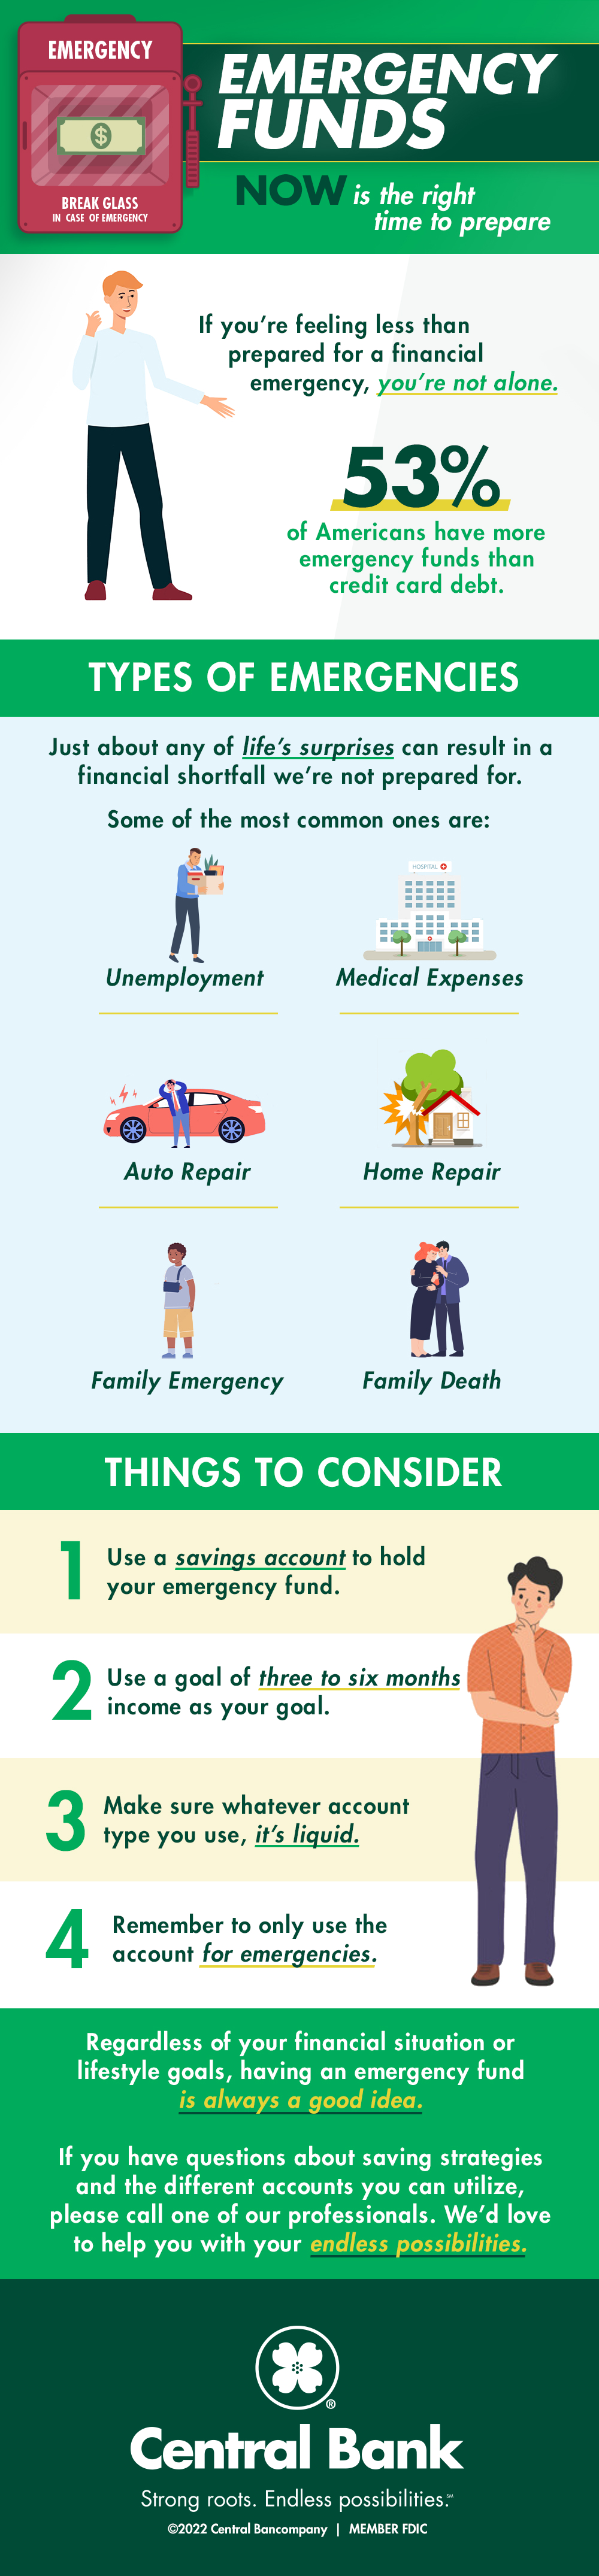 Emergency funds infographic